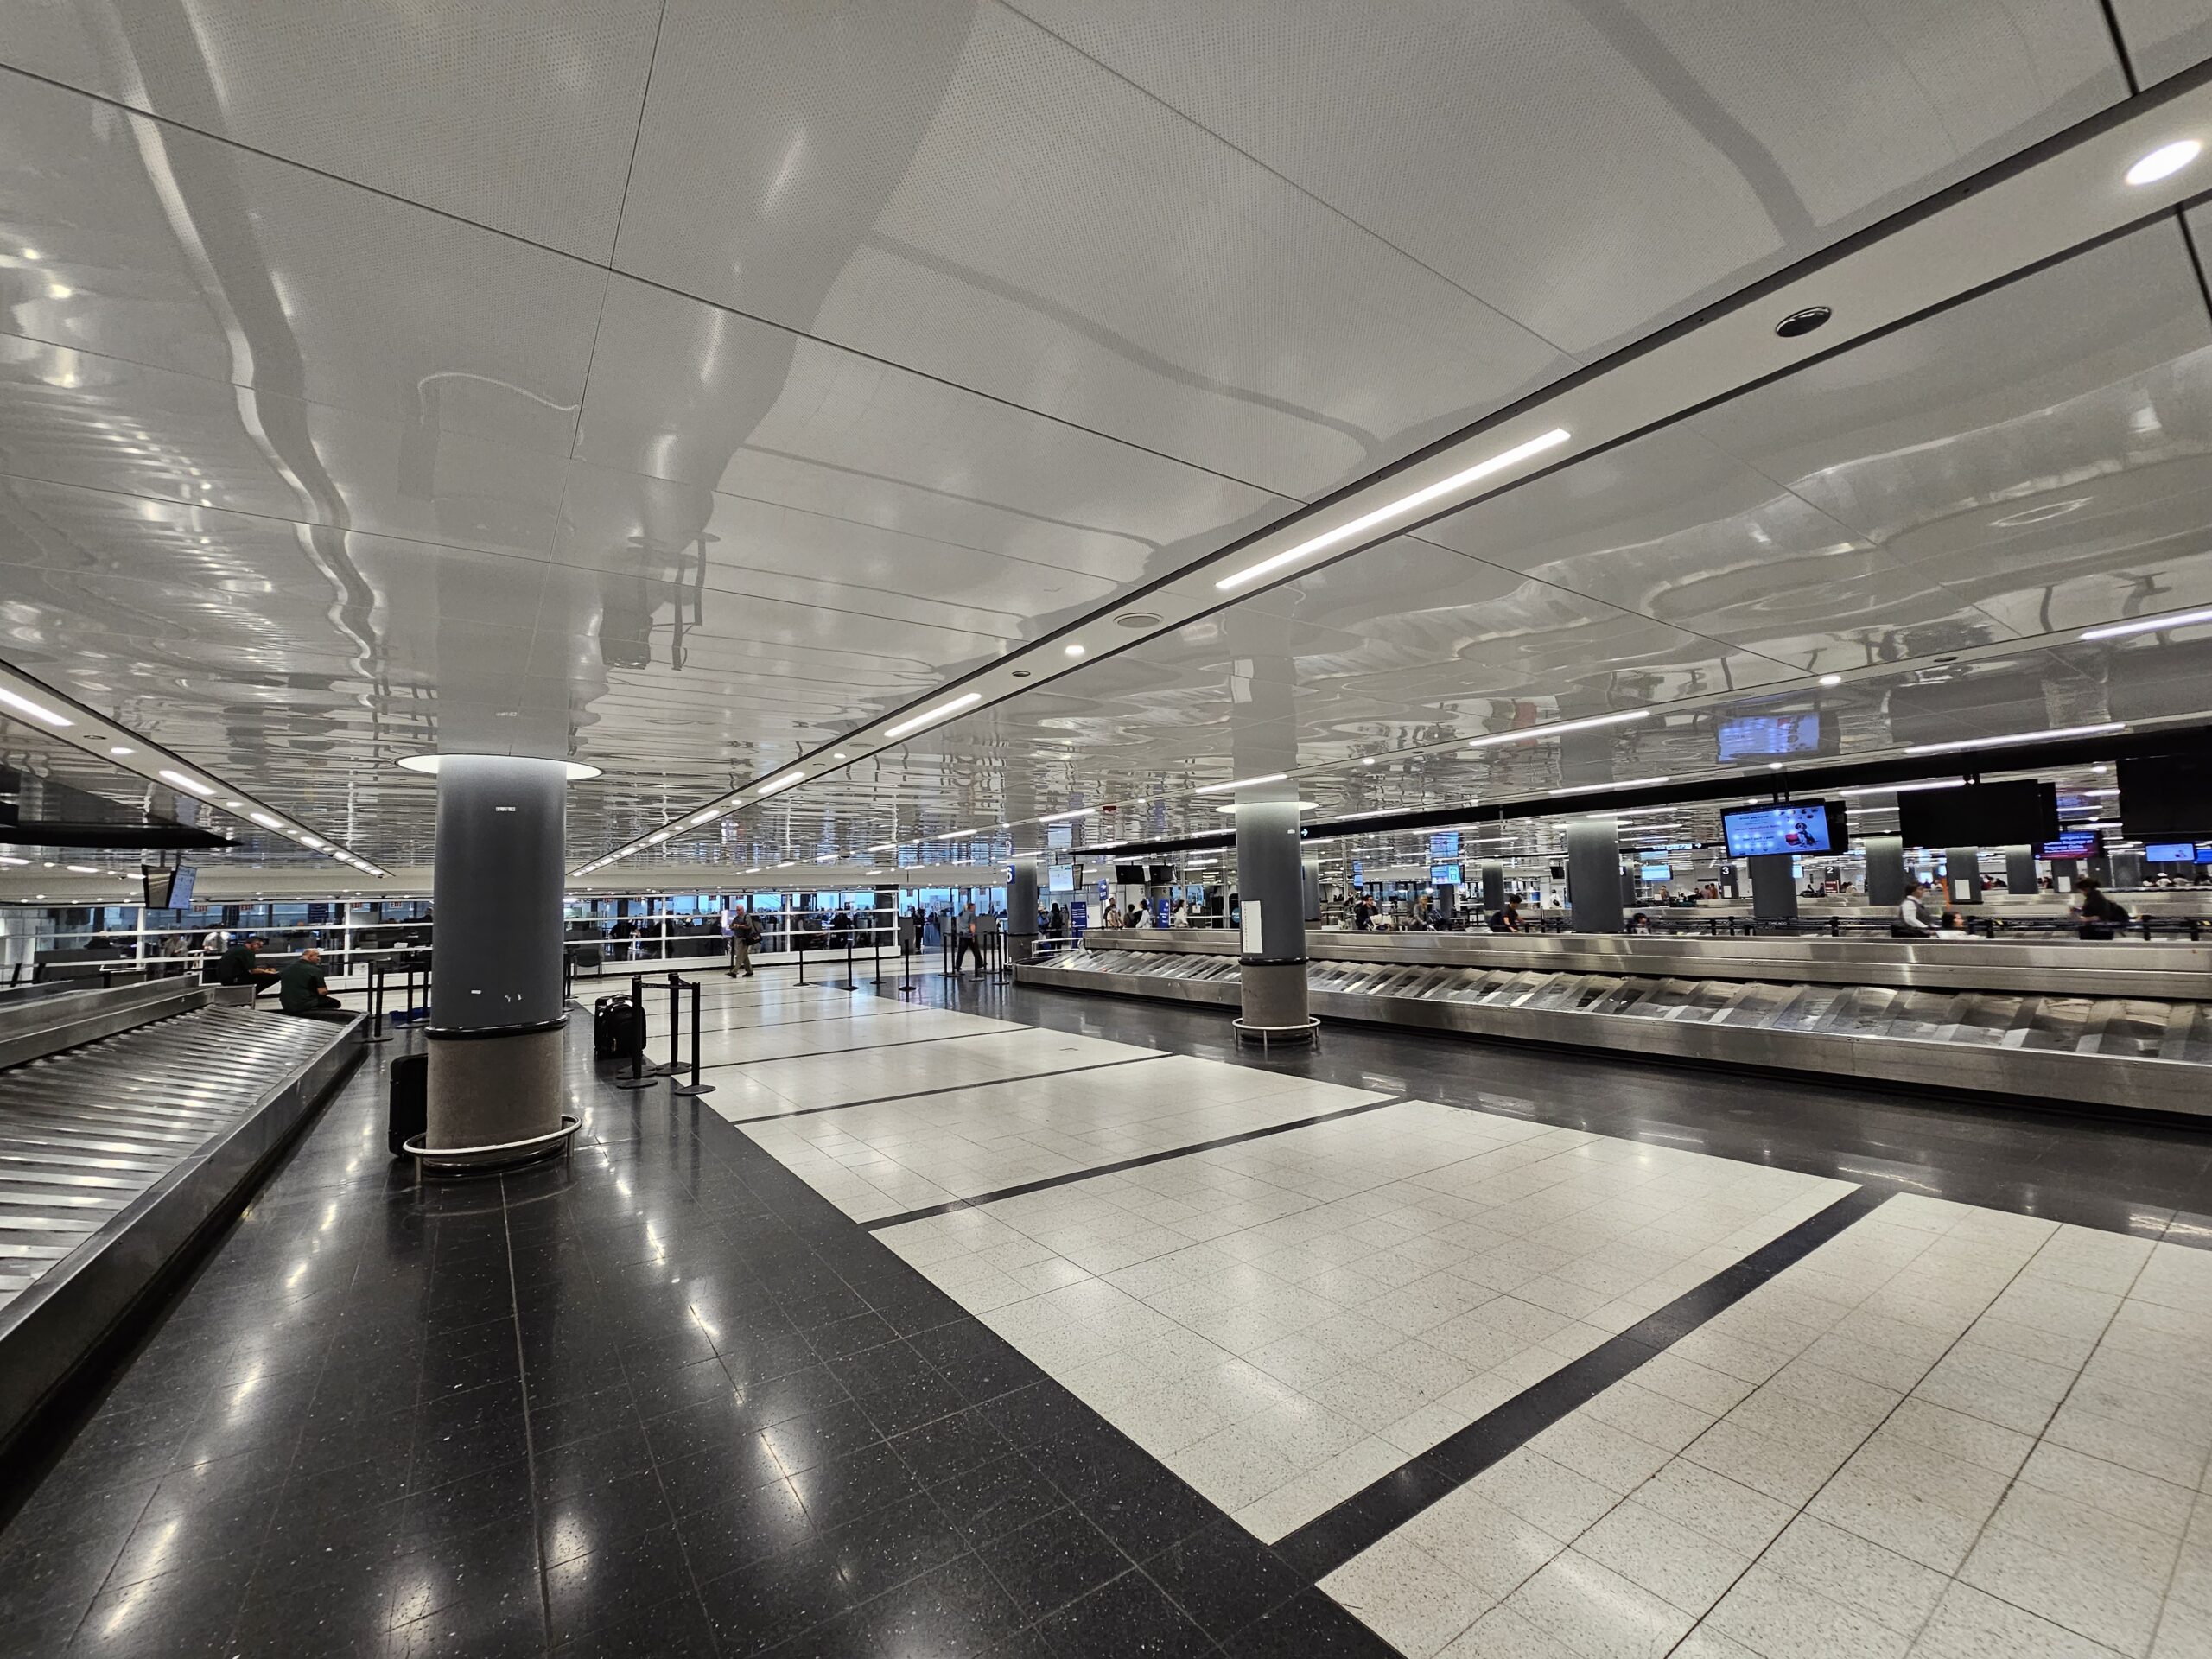 ohare-terminal-5-concourse-m-extension-core-expansion-repurposing-fire-alarm-replacement_8